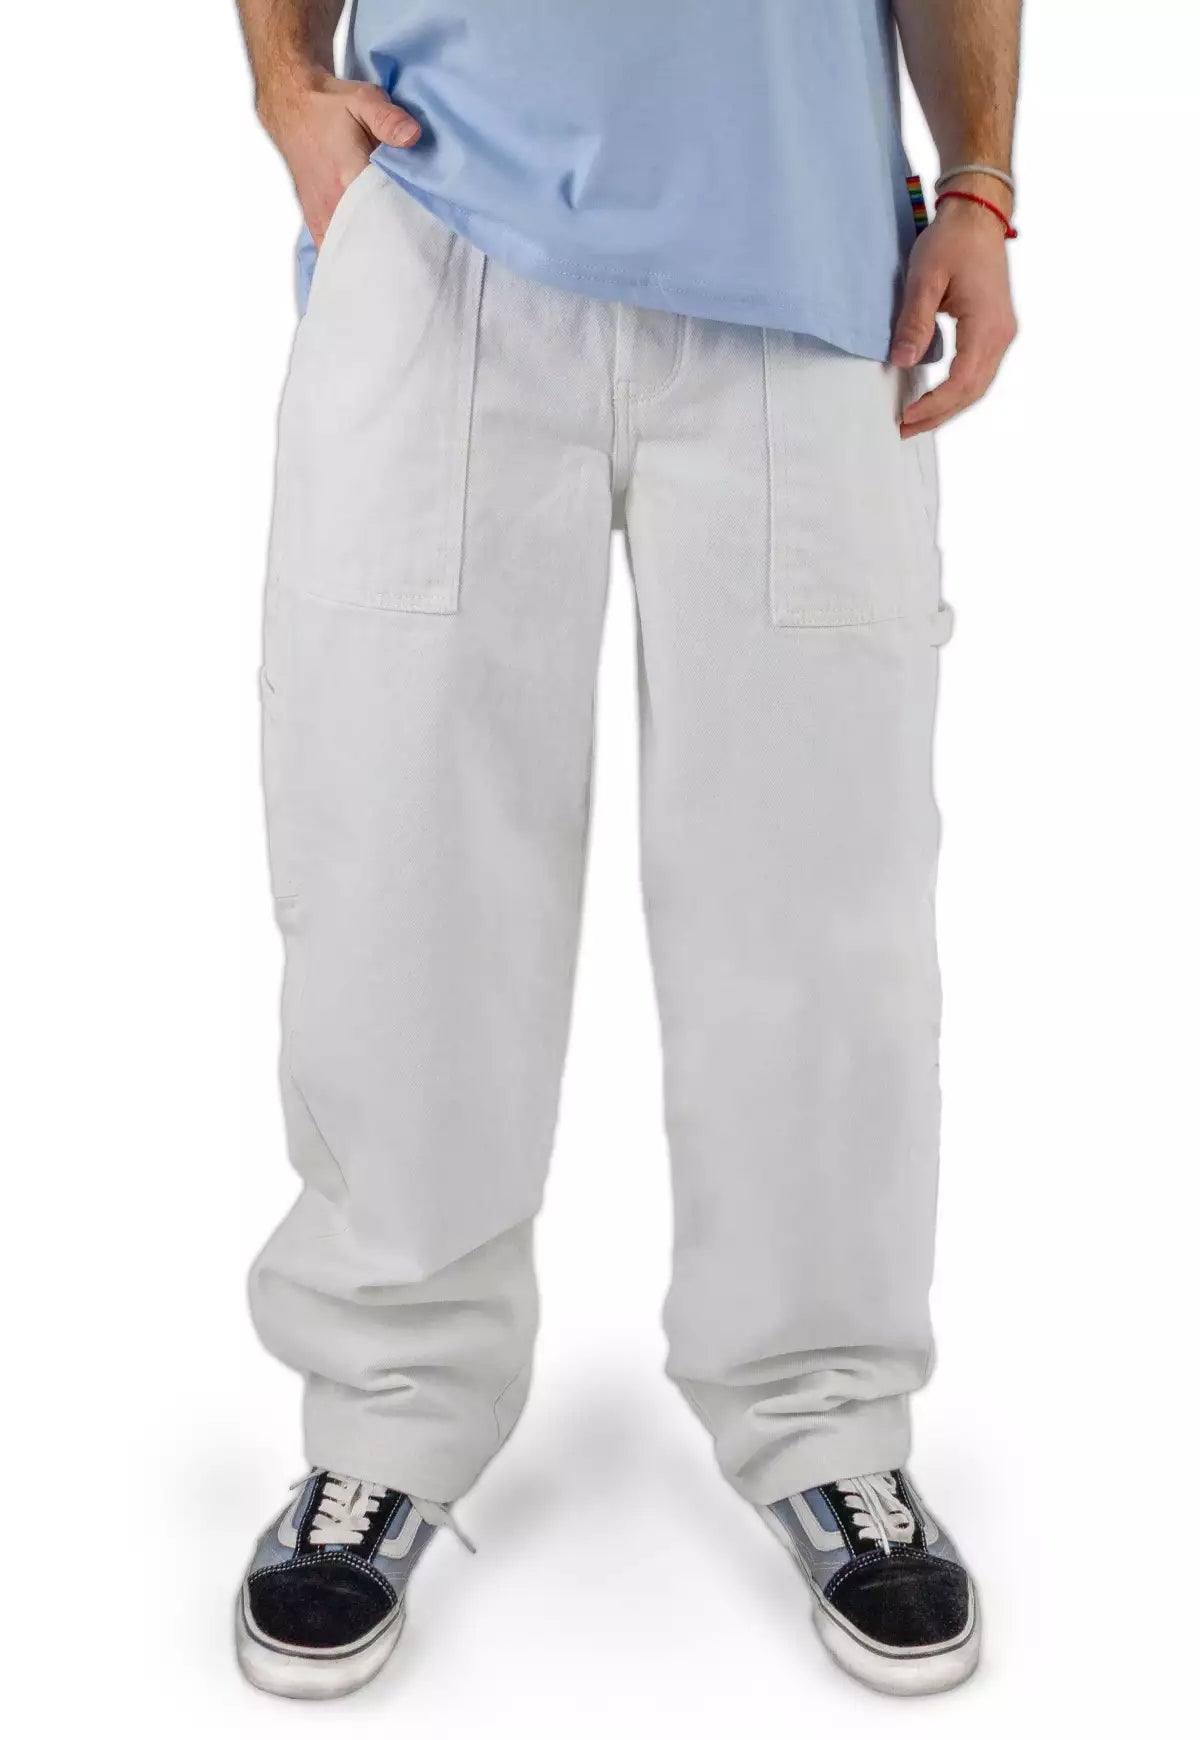 HOMEBOY - X-TRA WORK PANTS - OFF WHITE